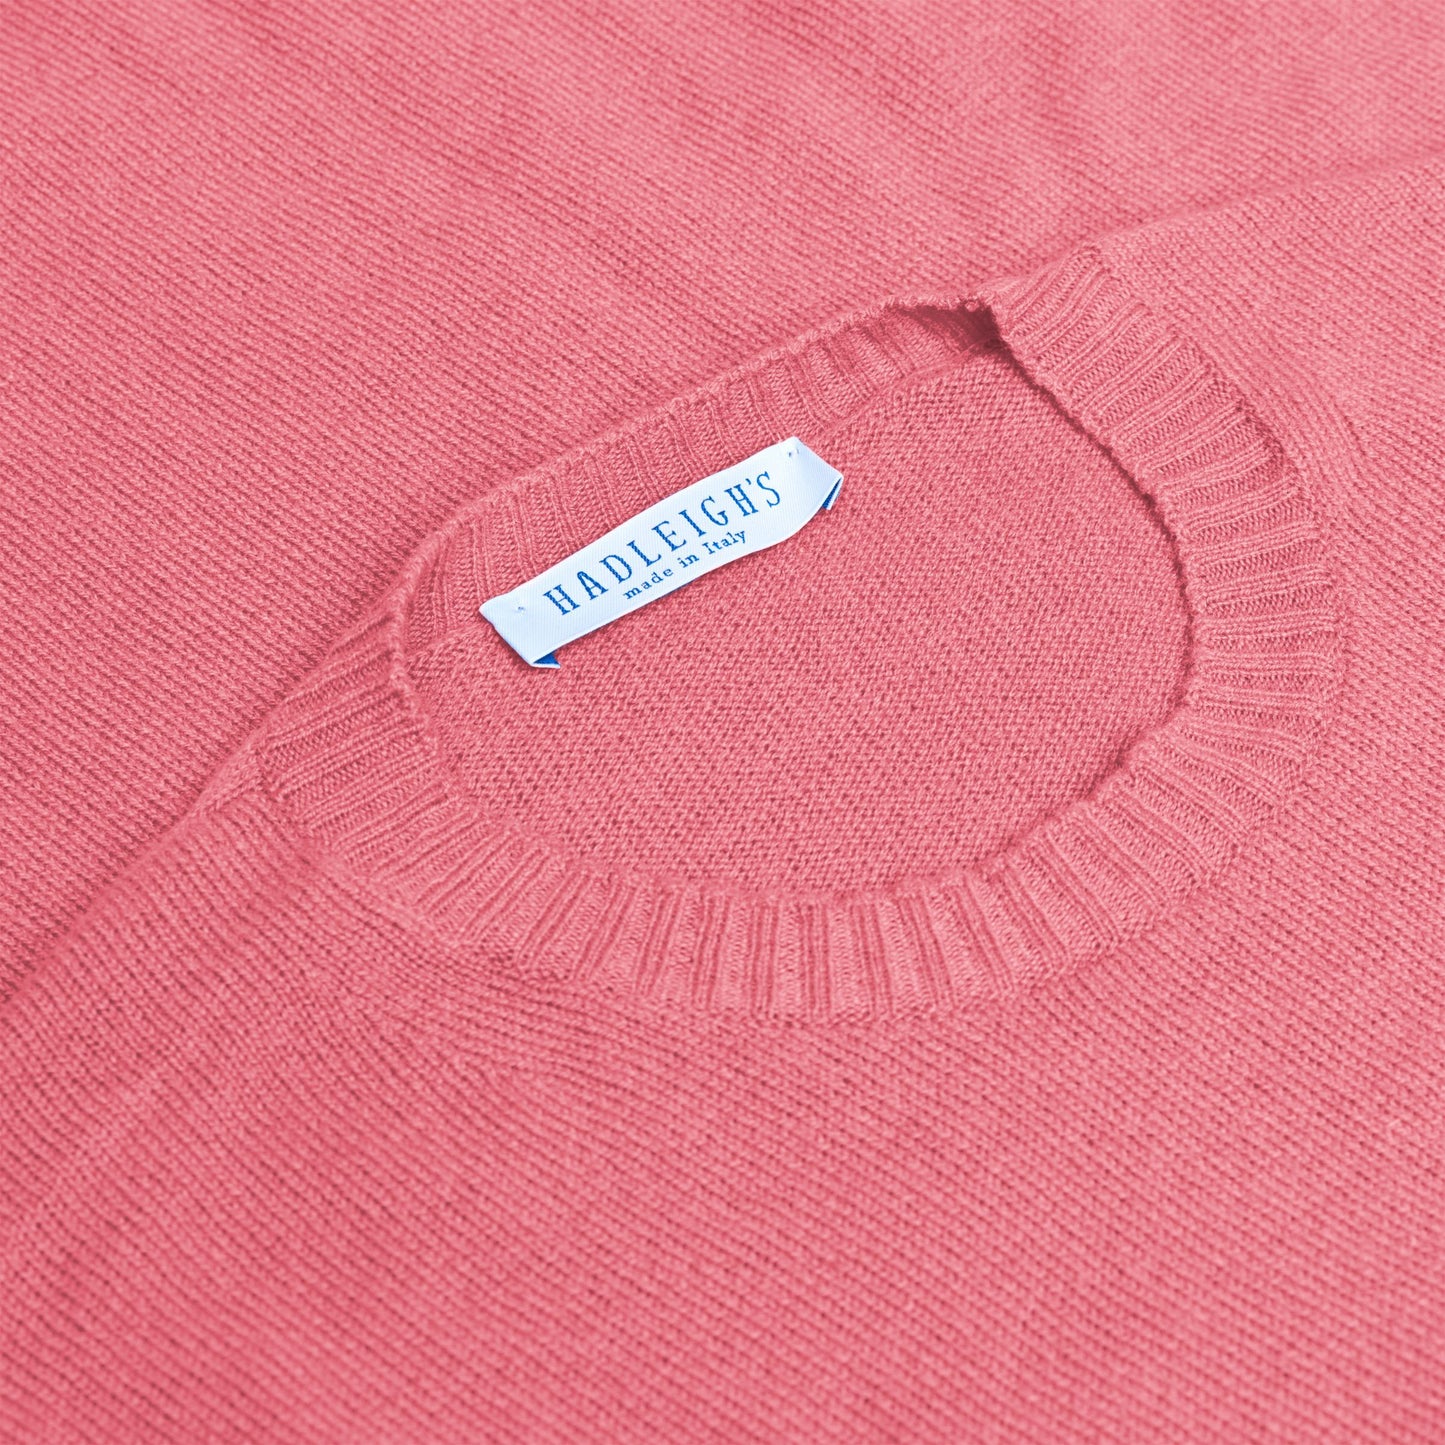 Cashmere Crewneck Sweater in Hot Pink